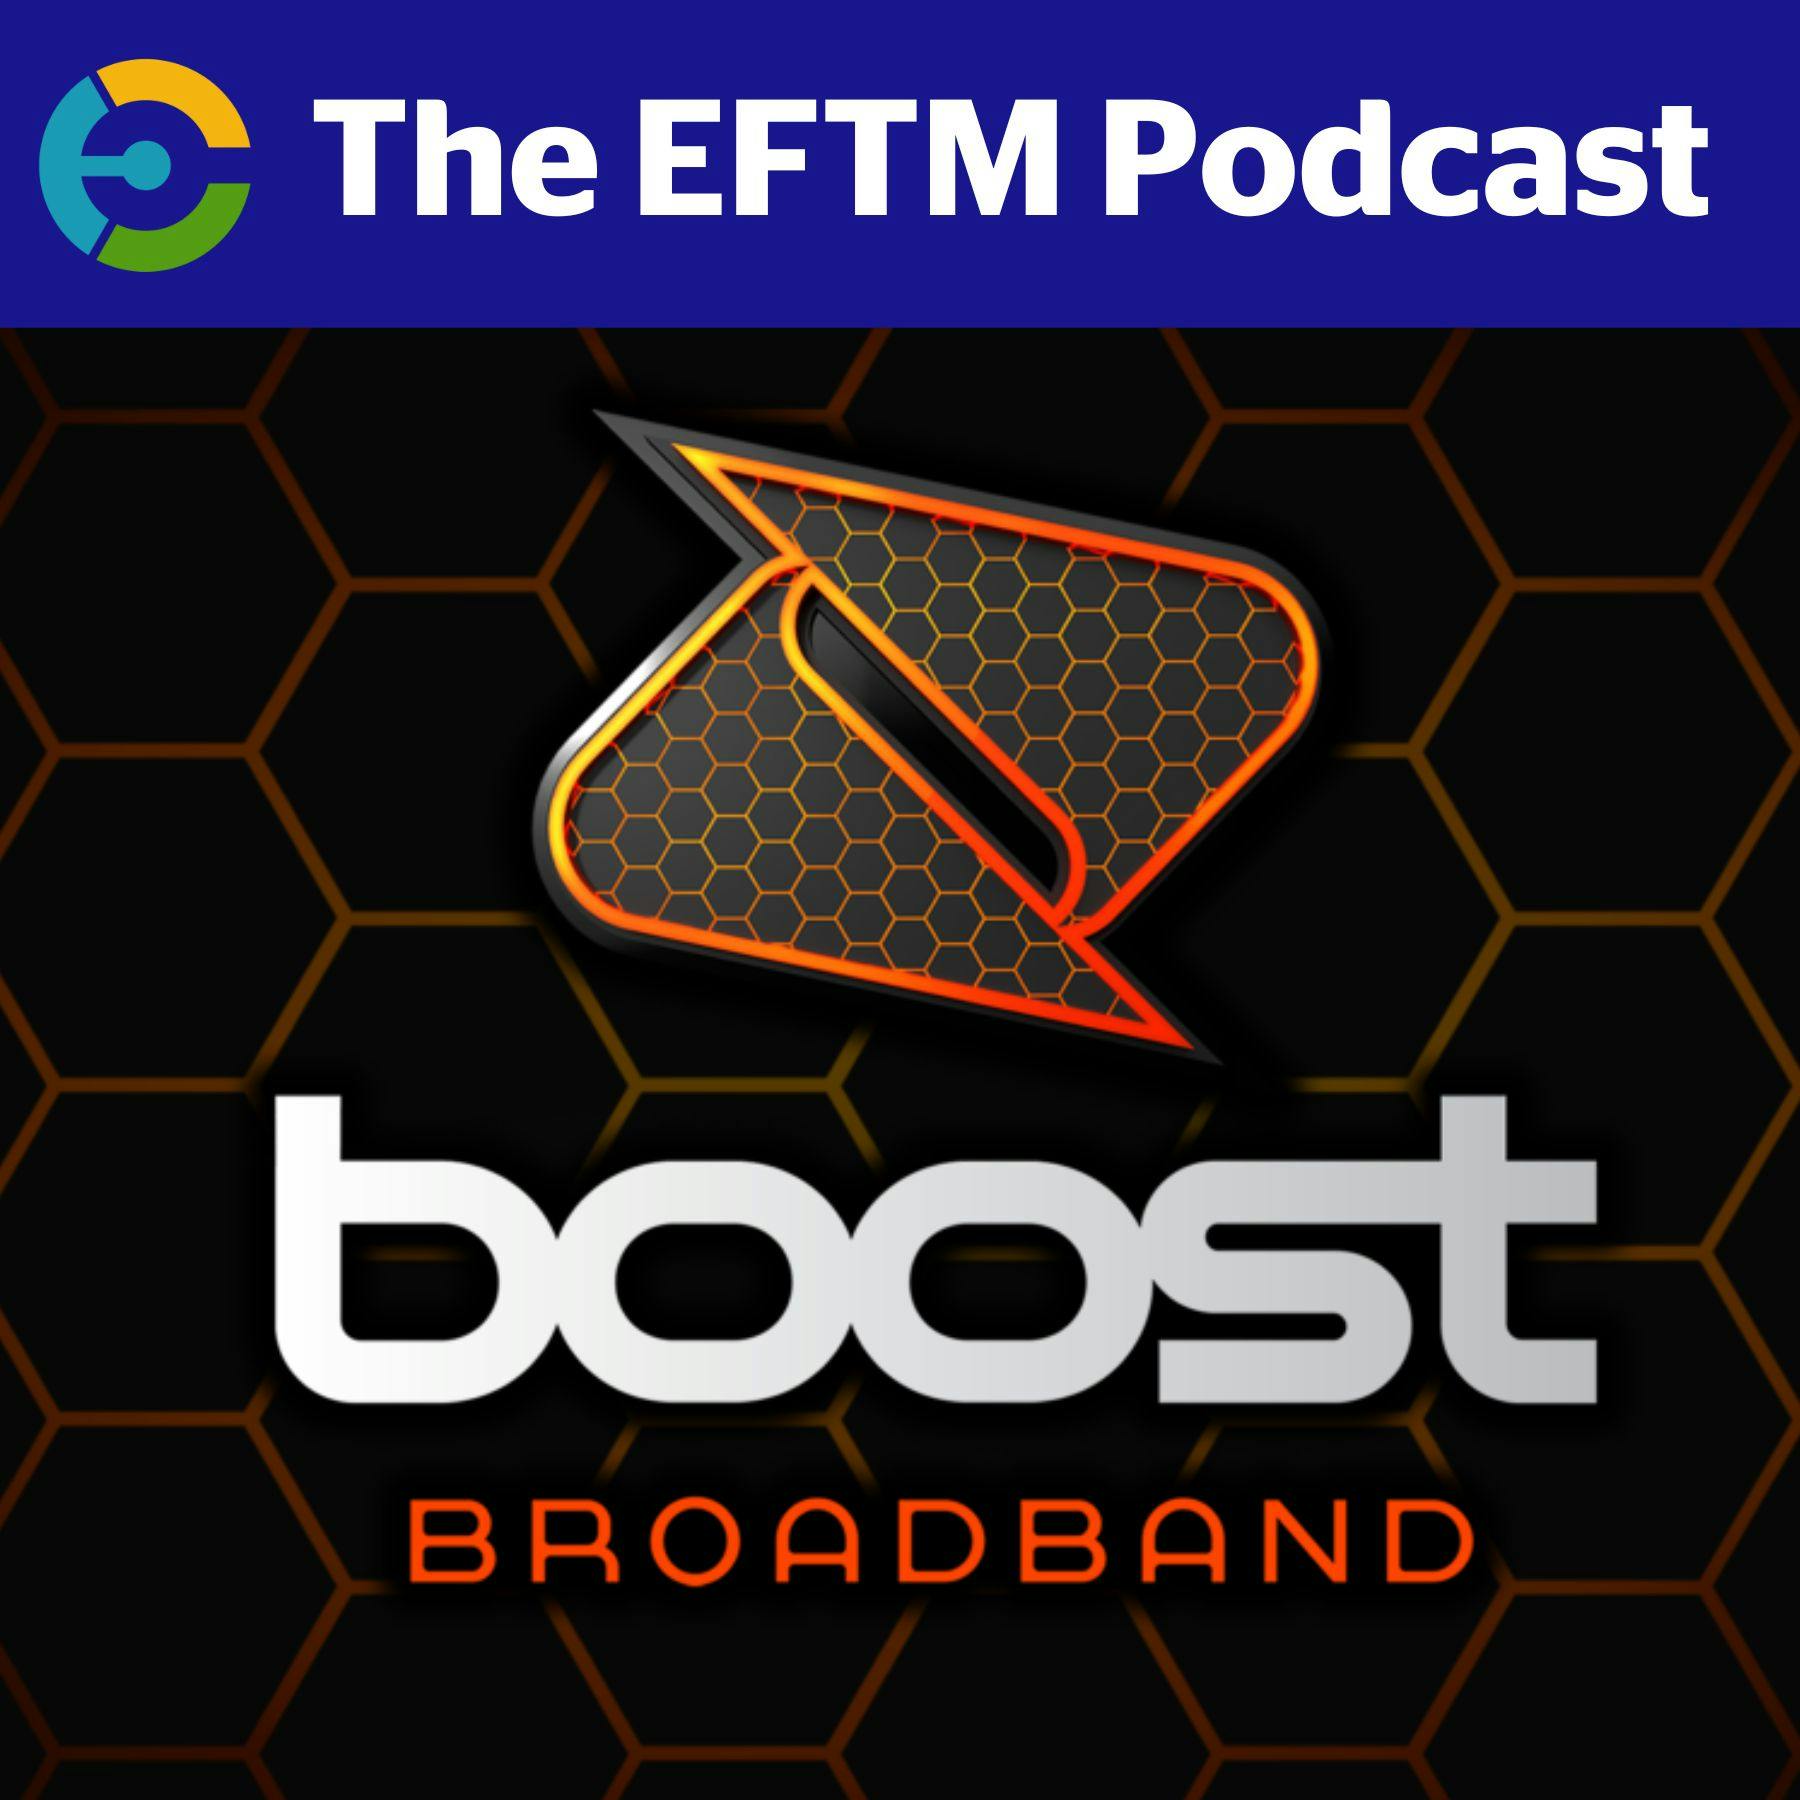 EFTM: Boost Broadband confirmed - what will it be?